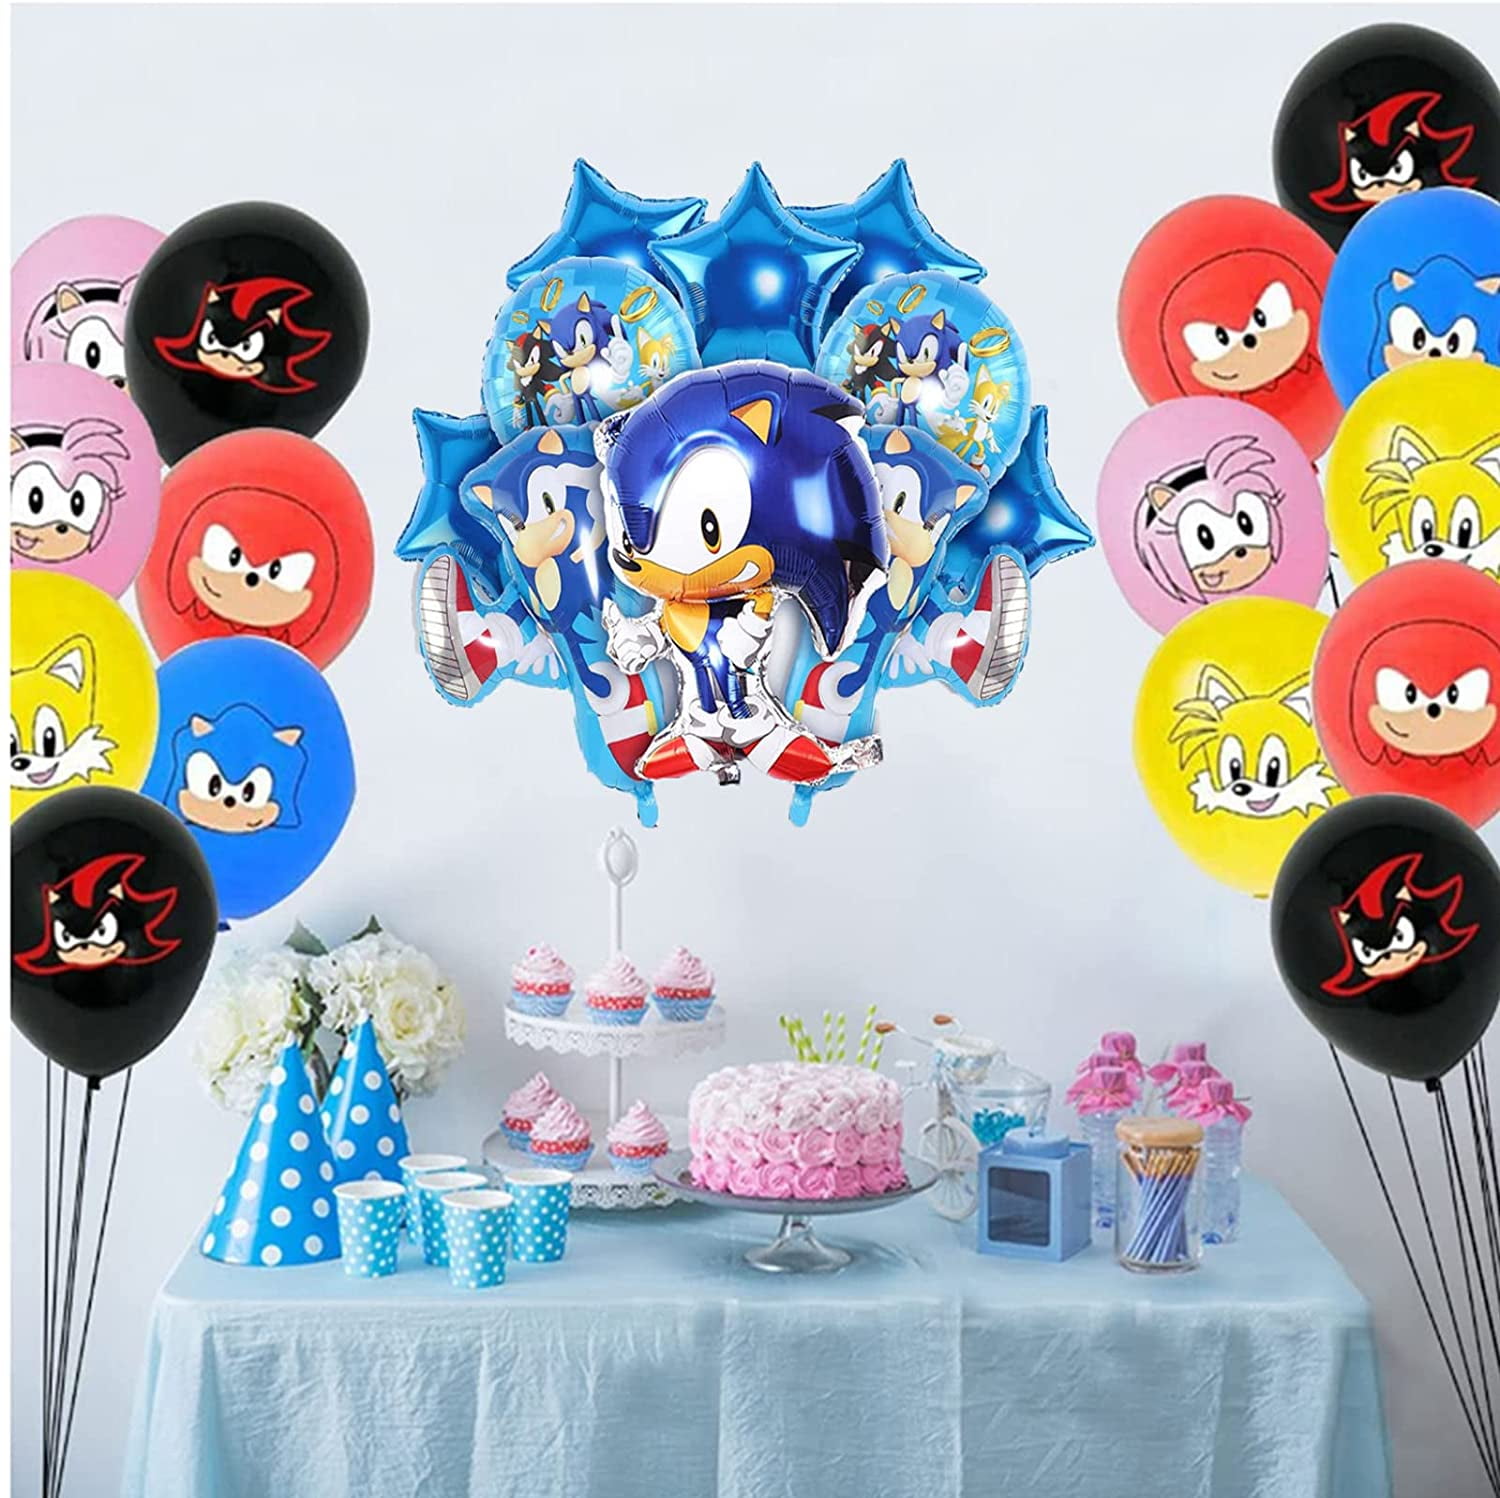  5 pcs Sonic Balloons, Sonic Party Supplies, Kids Baby